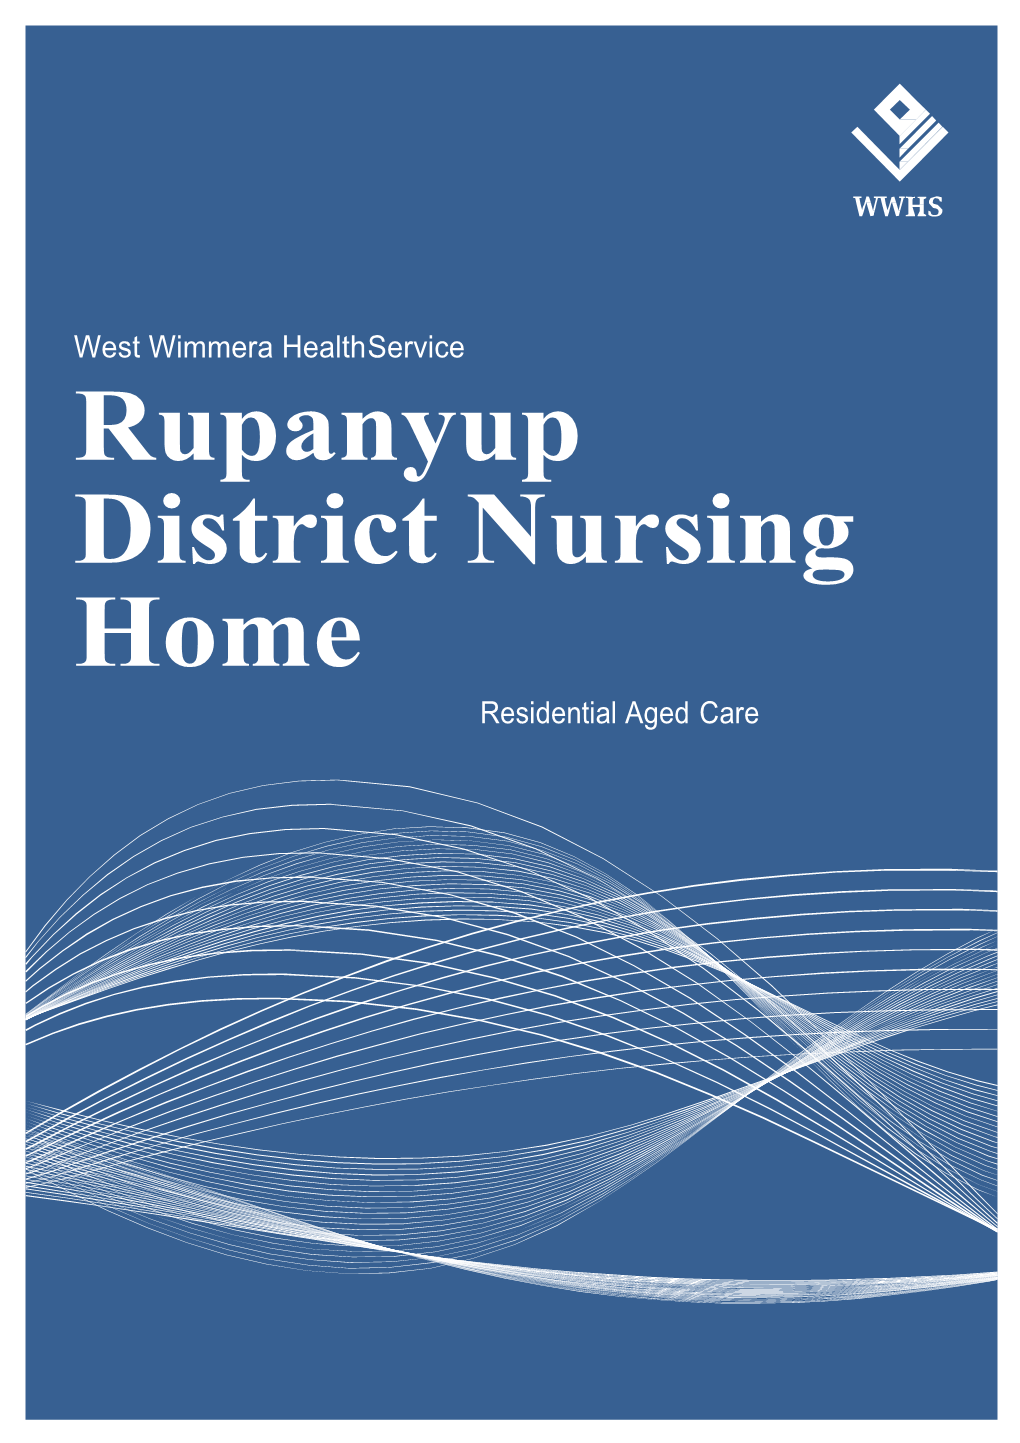 Rupanyup District Nursing Home Residential Aged Care Contents